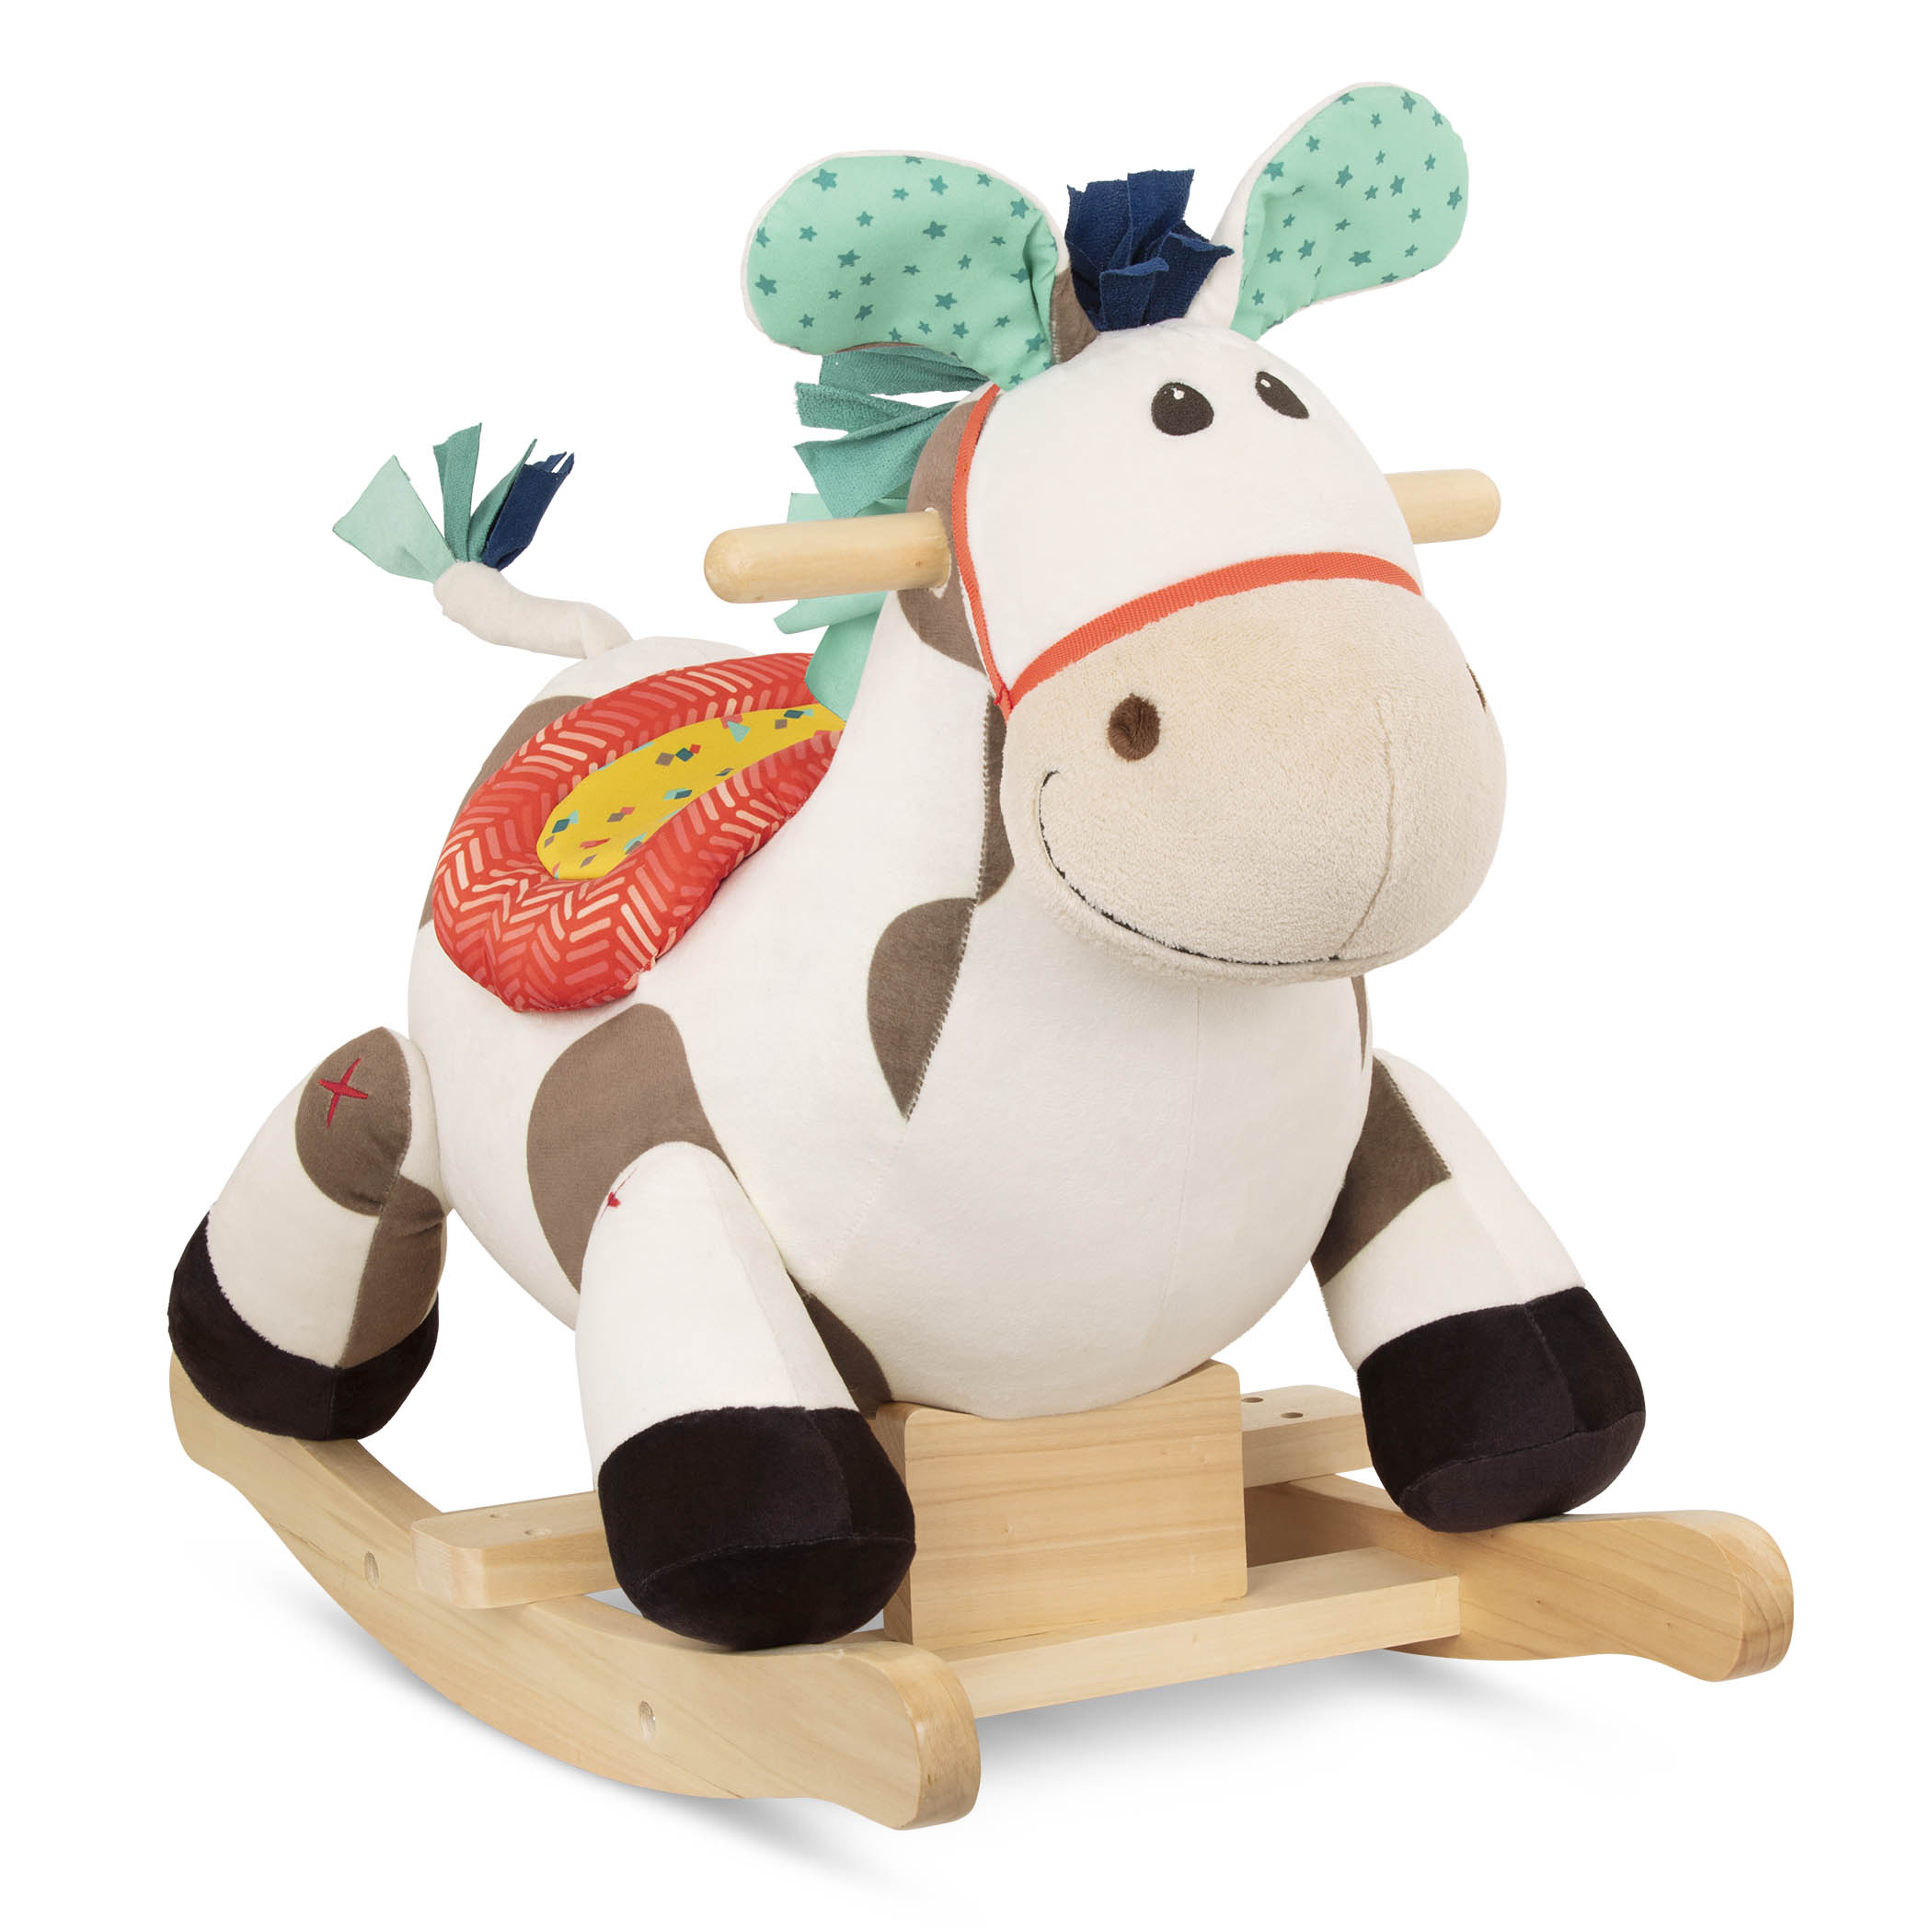 Toys Classic Rocking Unicorn for Toddlers for sale online B 